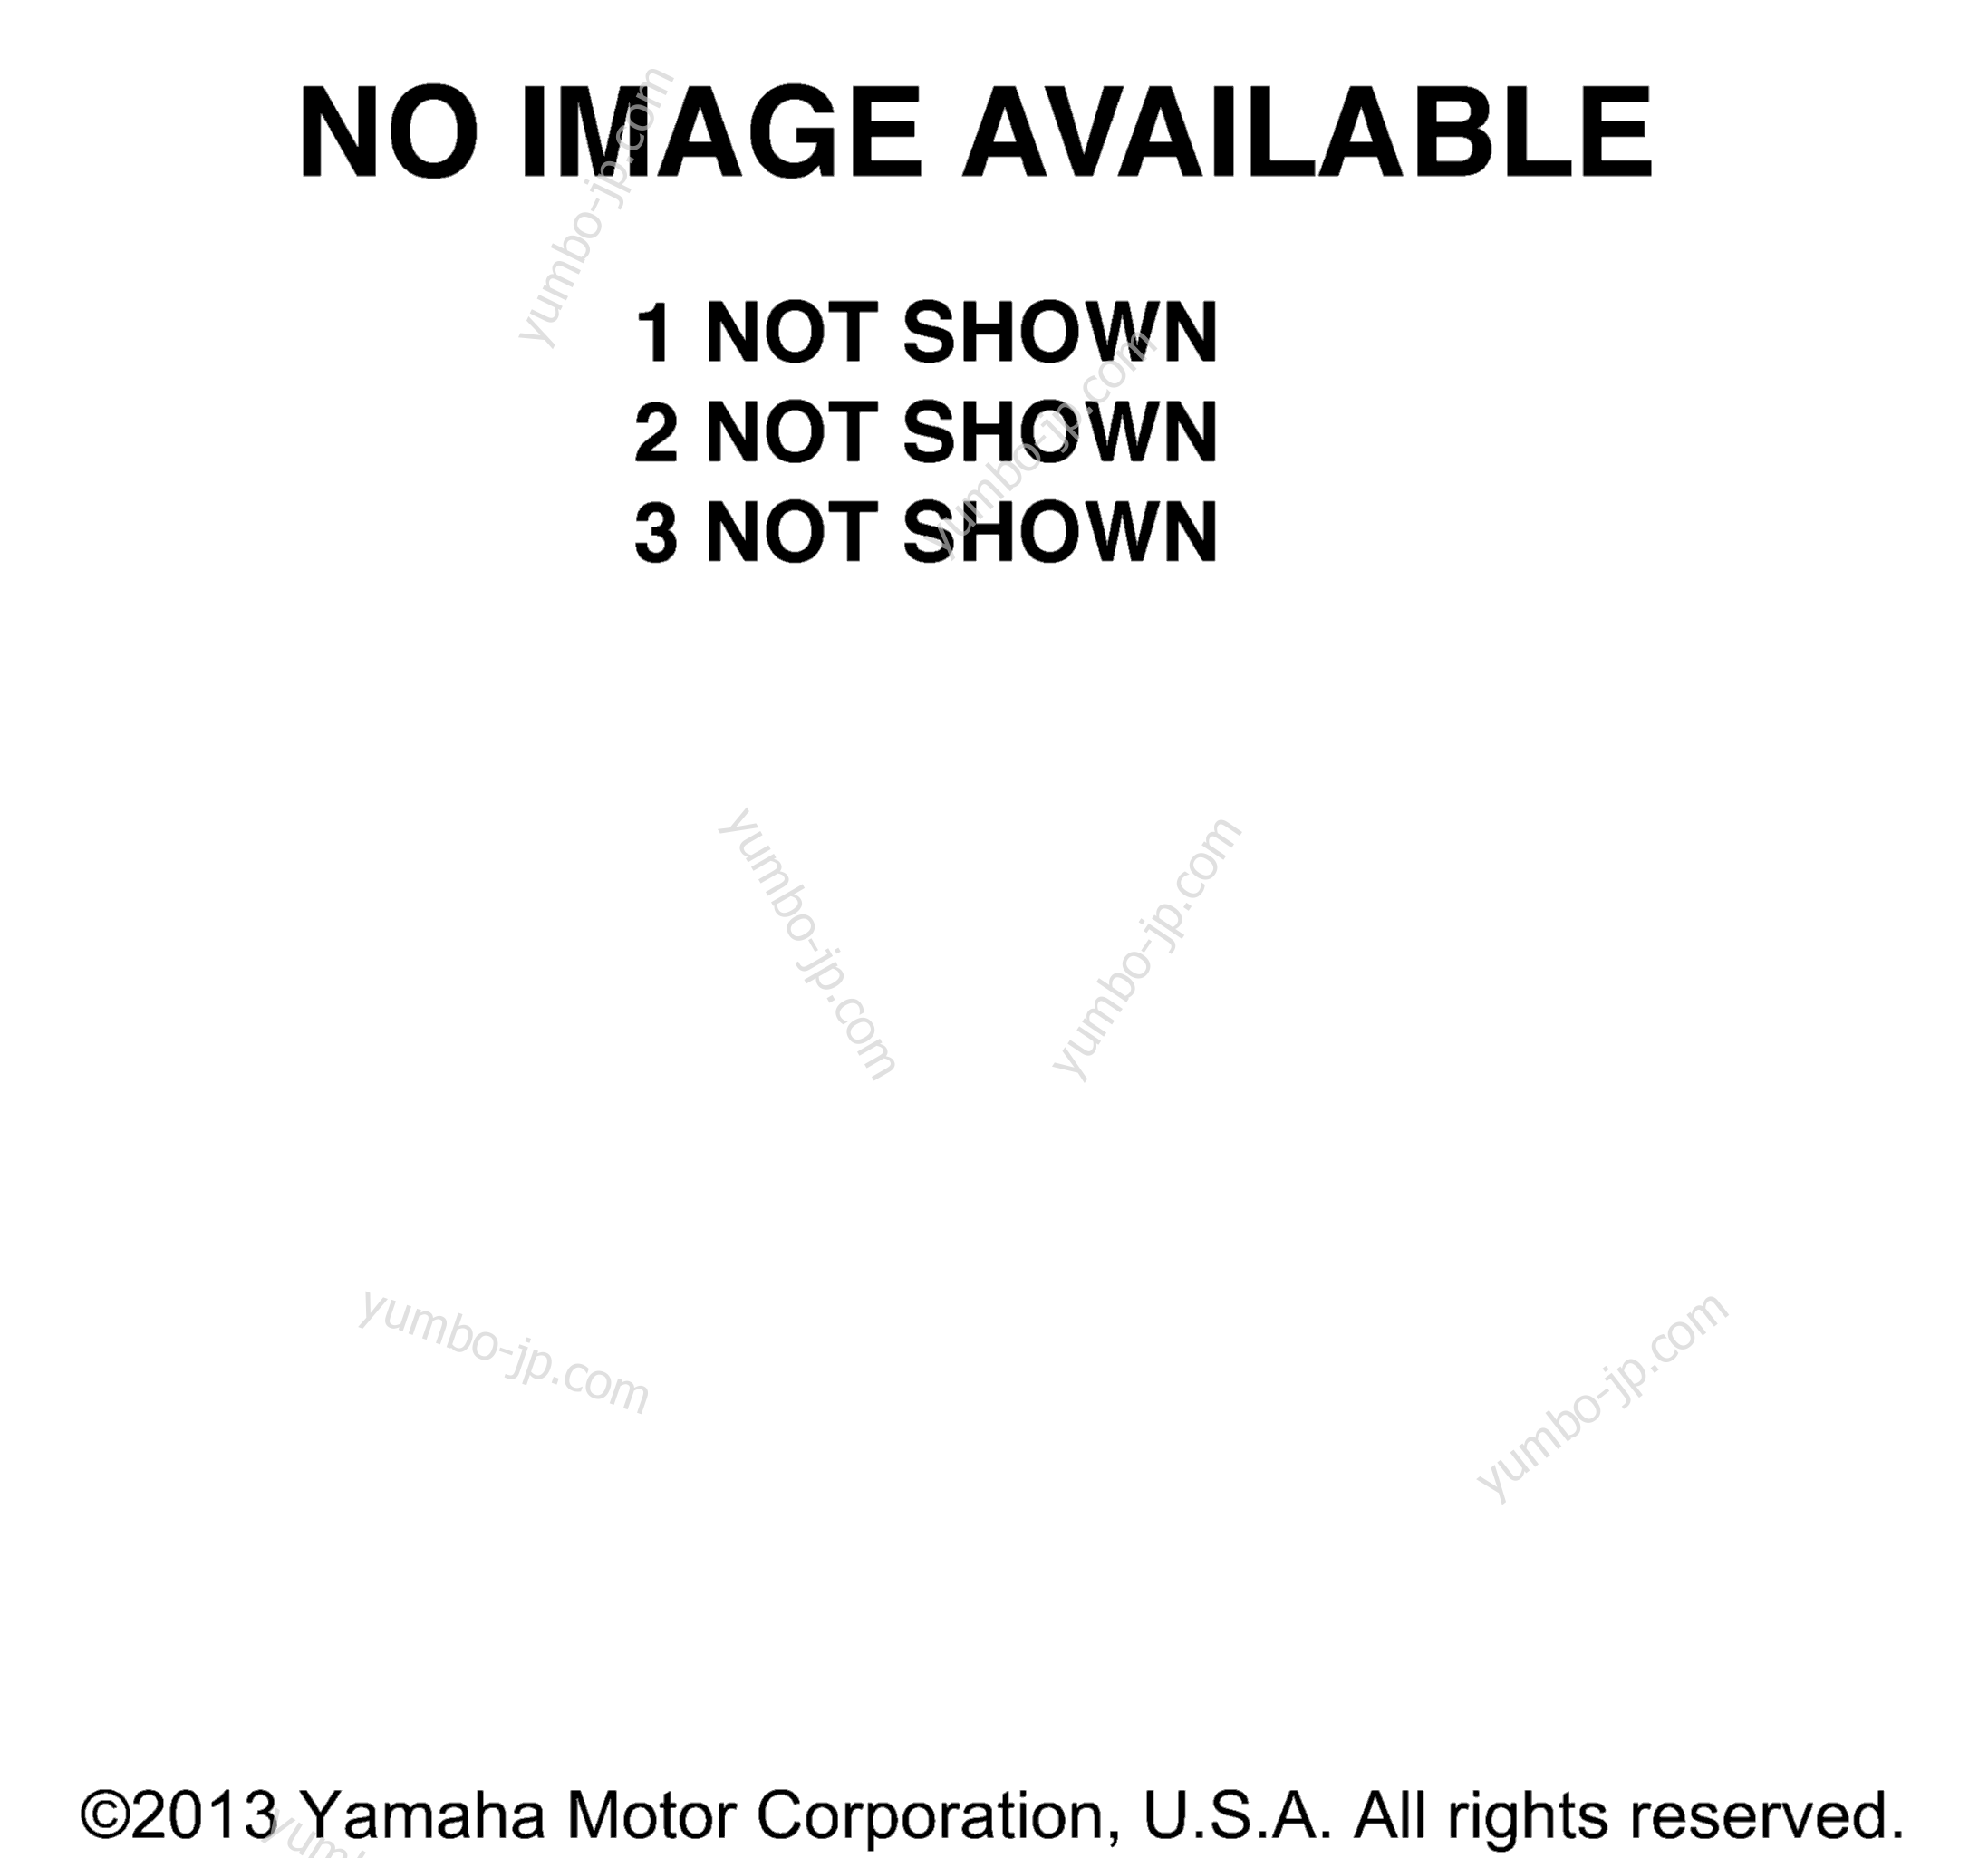 Additional Parts for ATVs YAMAHA YFZ450 SPECIAL EDITION (YFZ450SPX) 2008 year